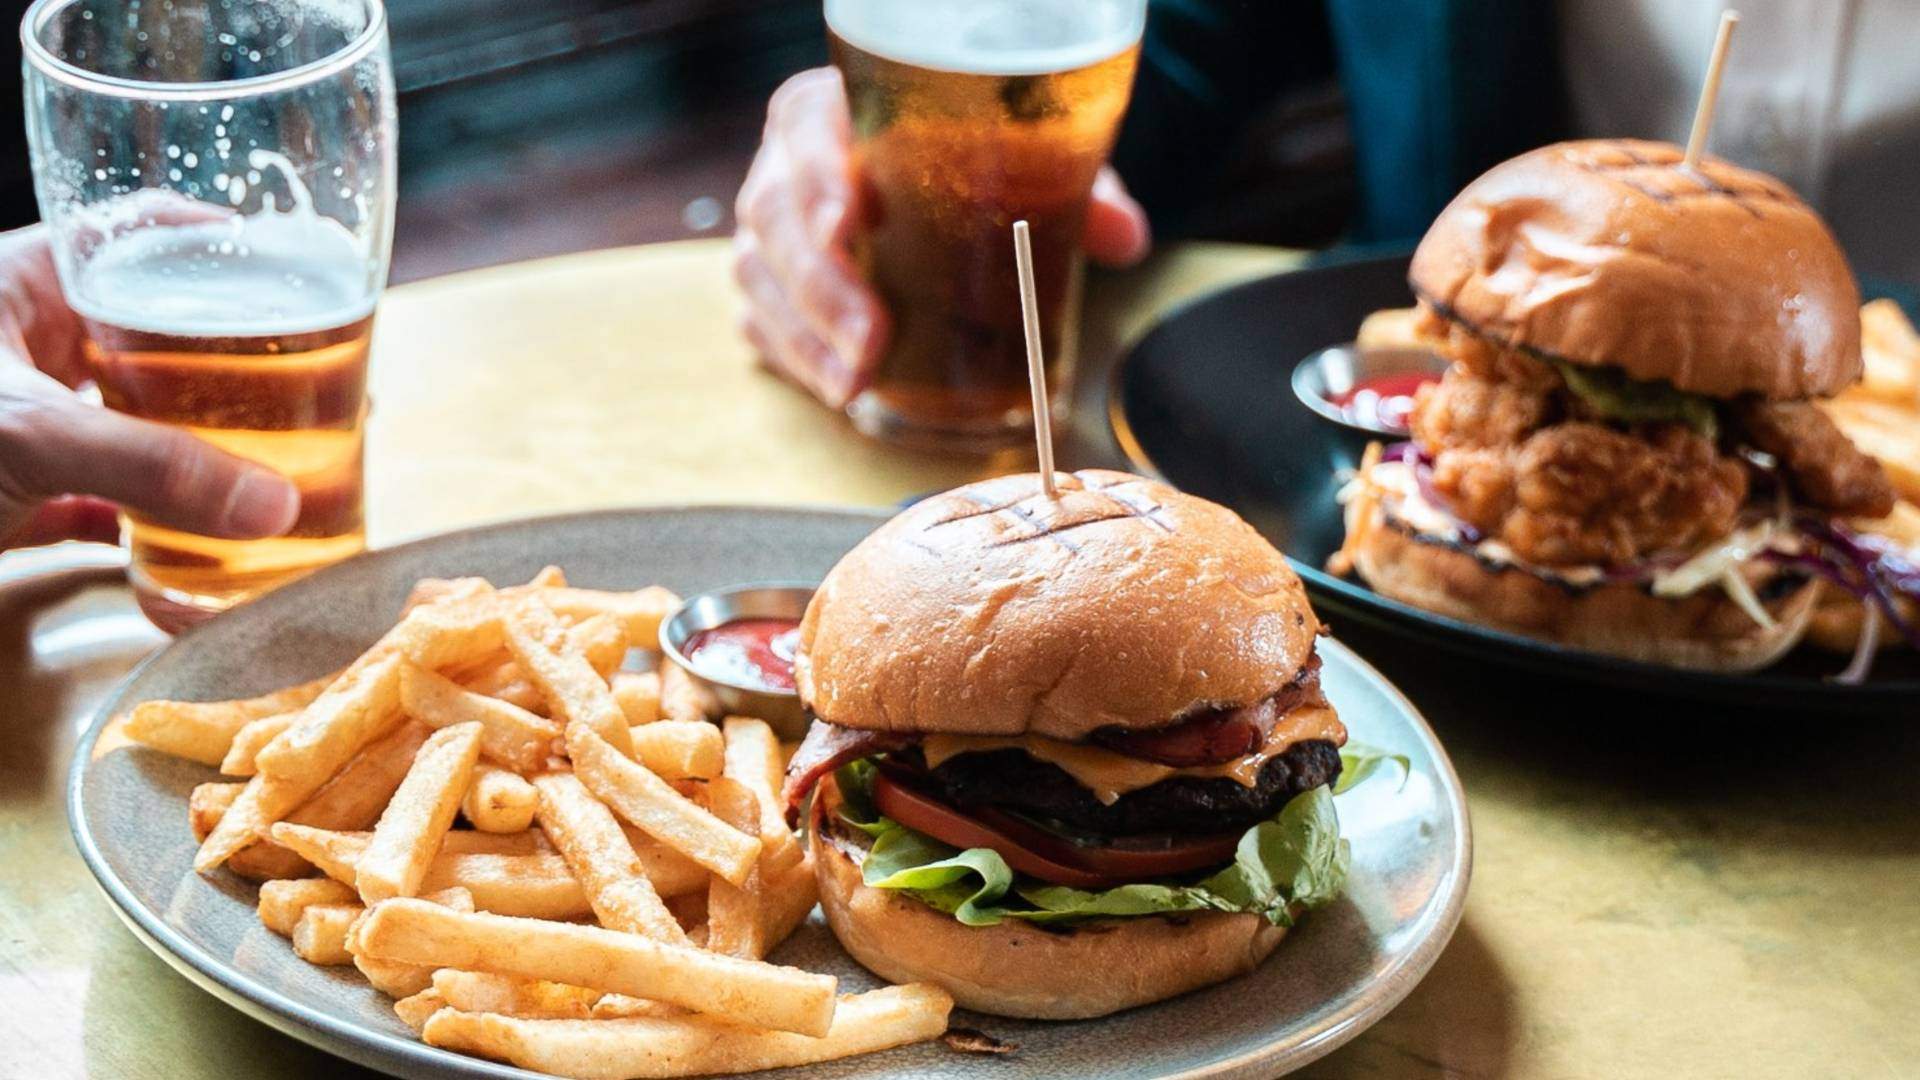 burgers and beers on a table